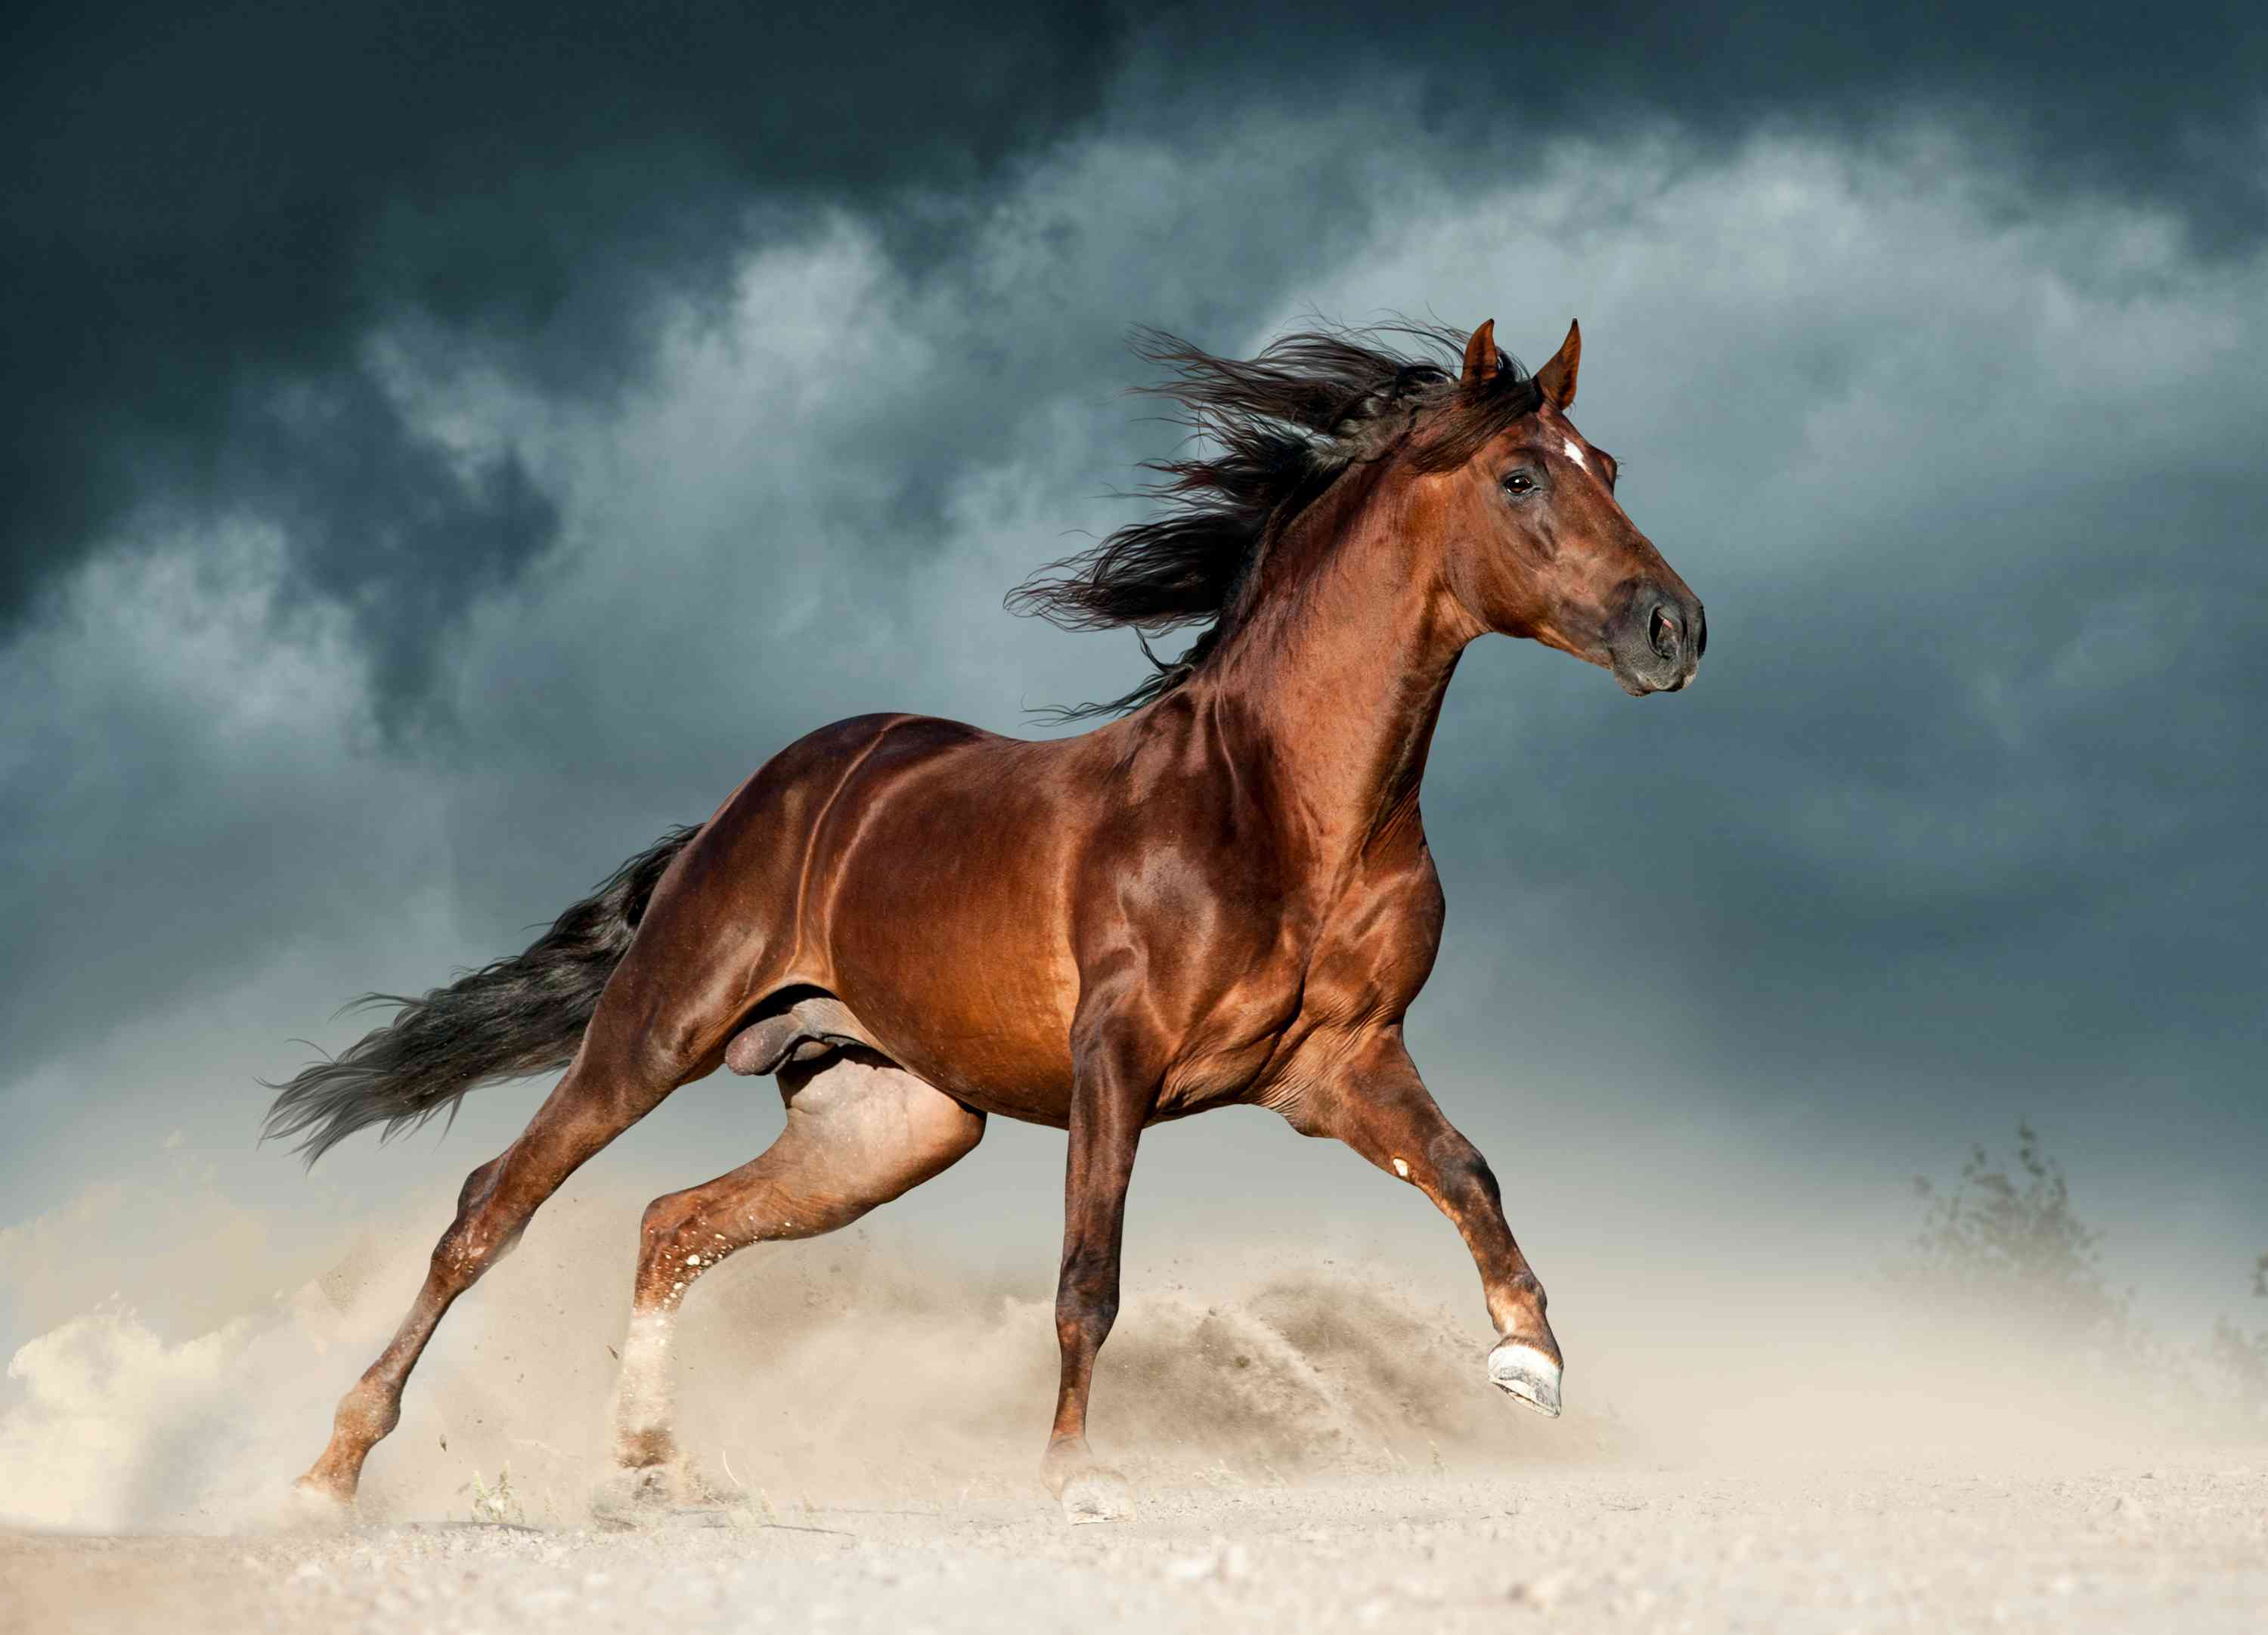 Chestnut Andalusian cantering in a desert setting